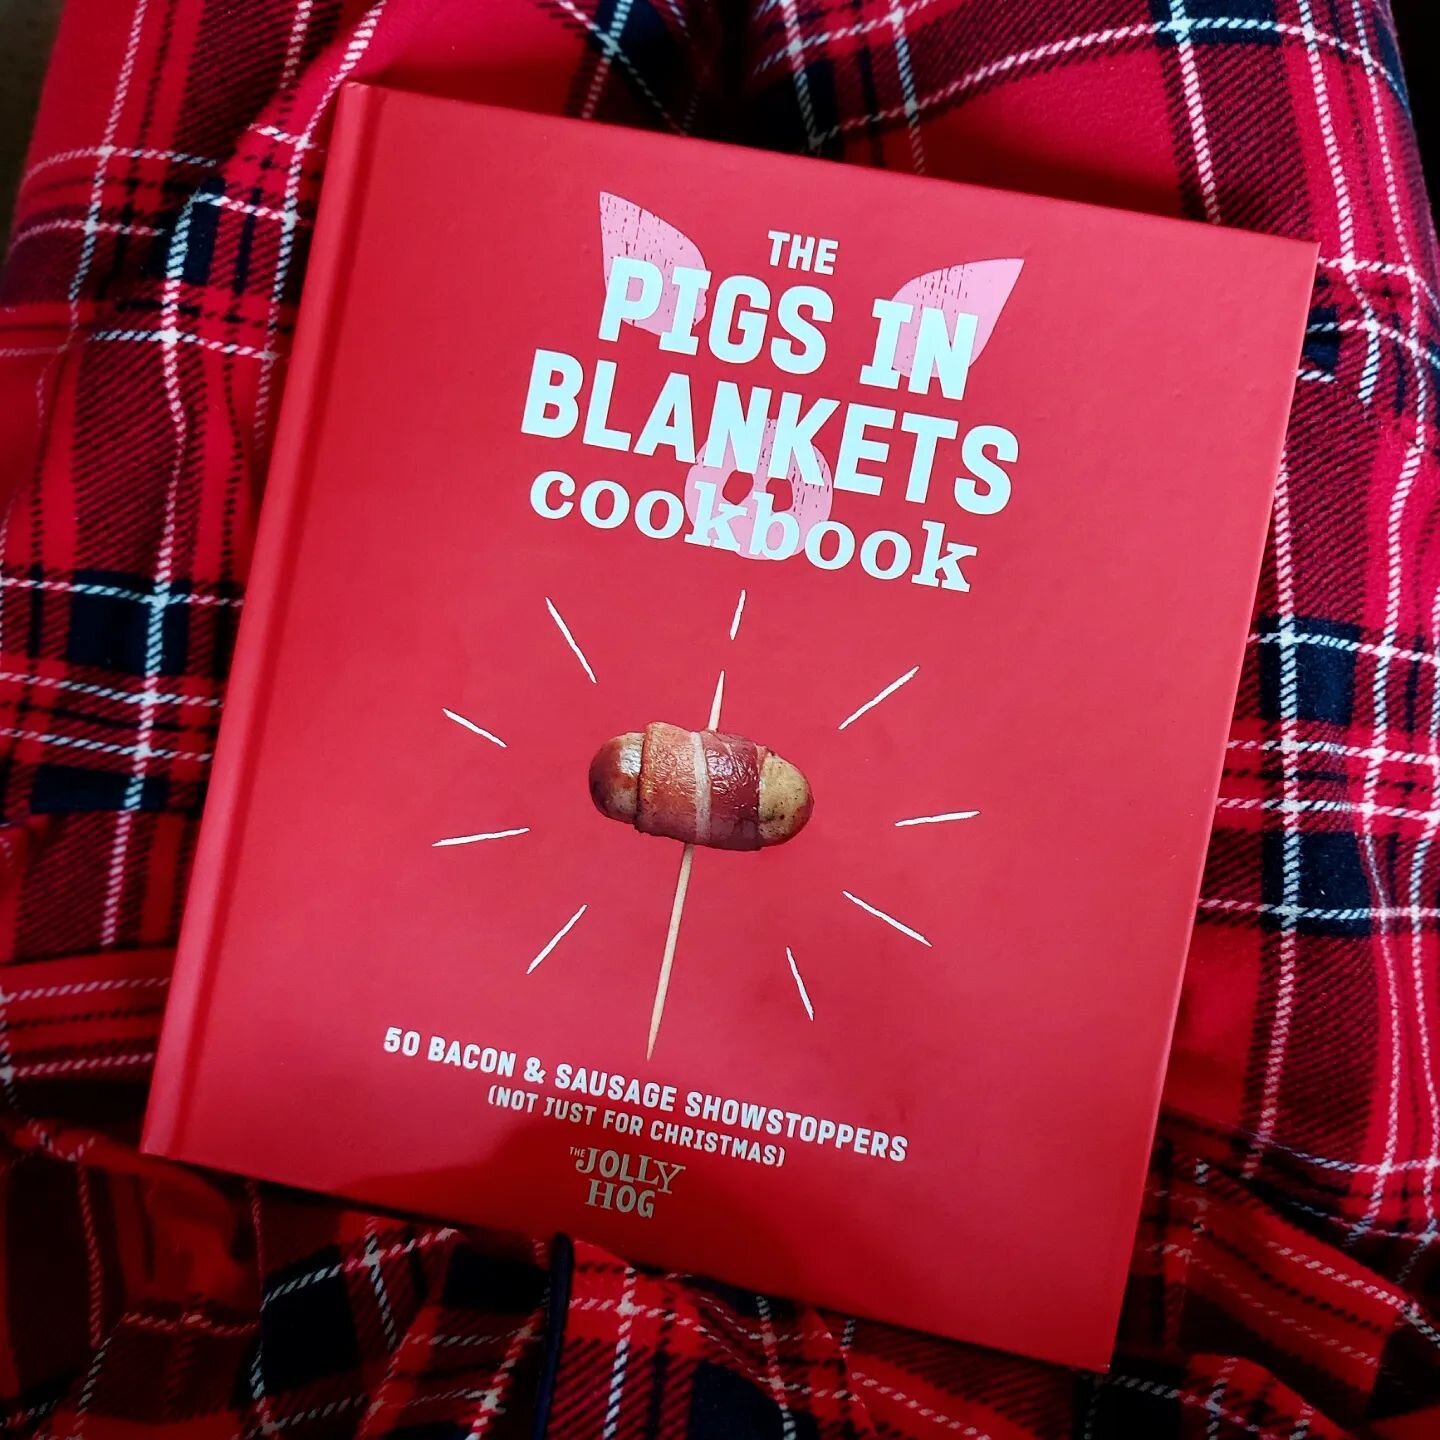 🐷❤️ WORLD'S FIRST ❤️🐷

Pigs in blankets are &quot;not just for Christmas!&quot; and although I am enjoying thumbing through this book sat in my festive pj's, I can confidently say this book really makes you want to eat them ALL YEAR ROUND! 

SO pro